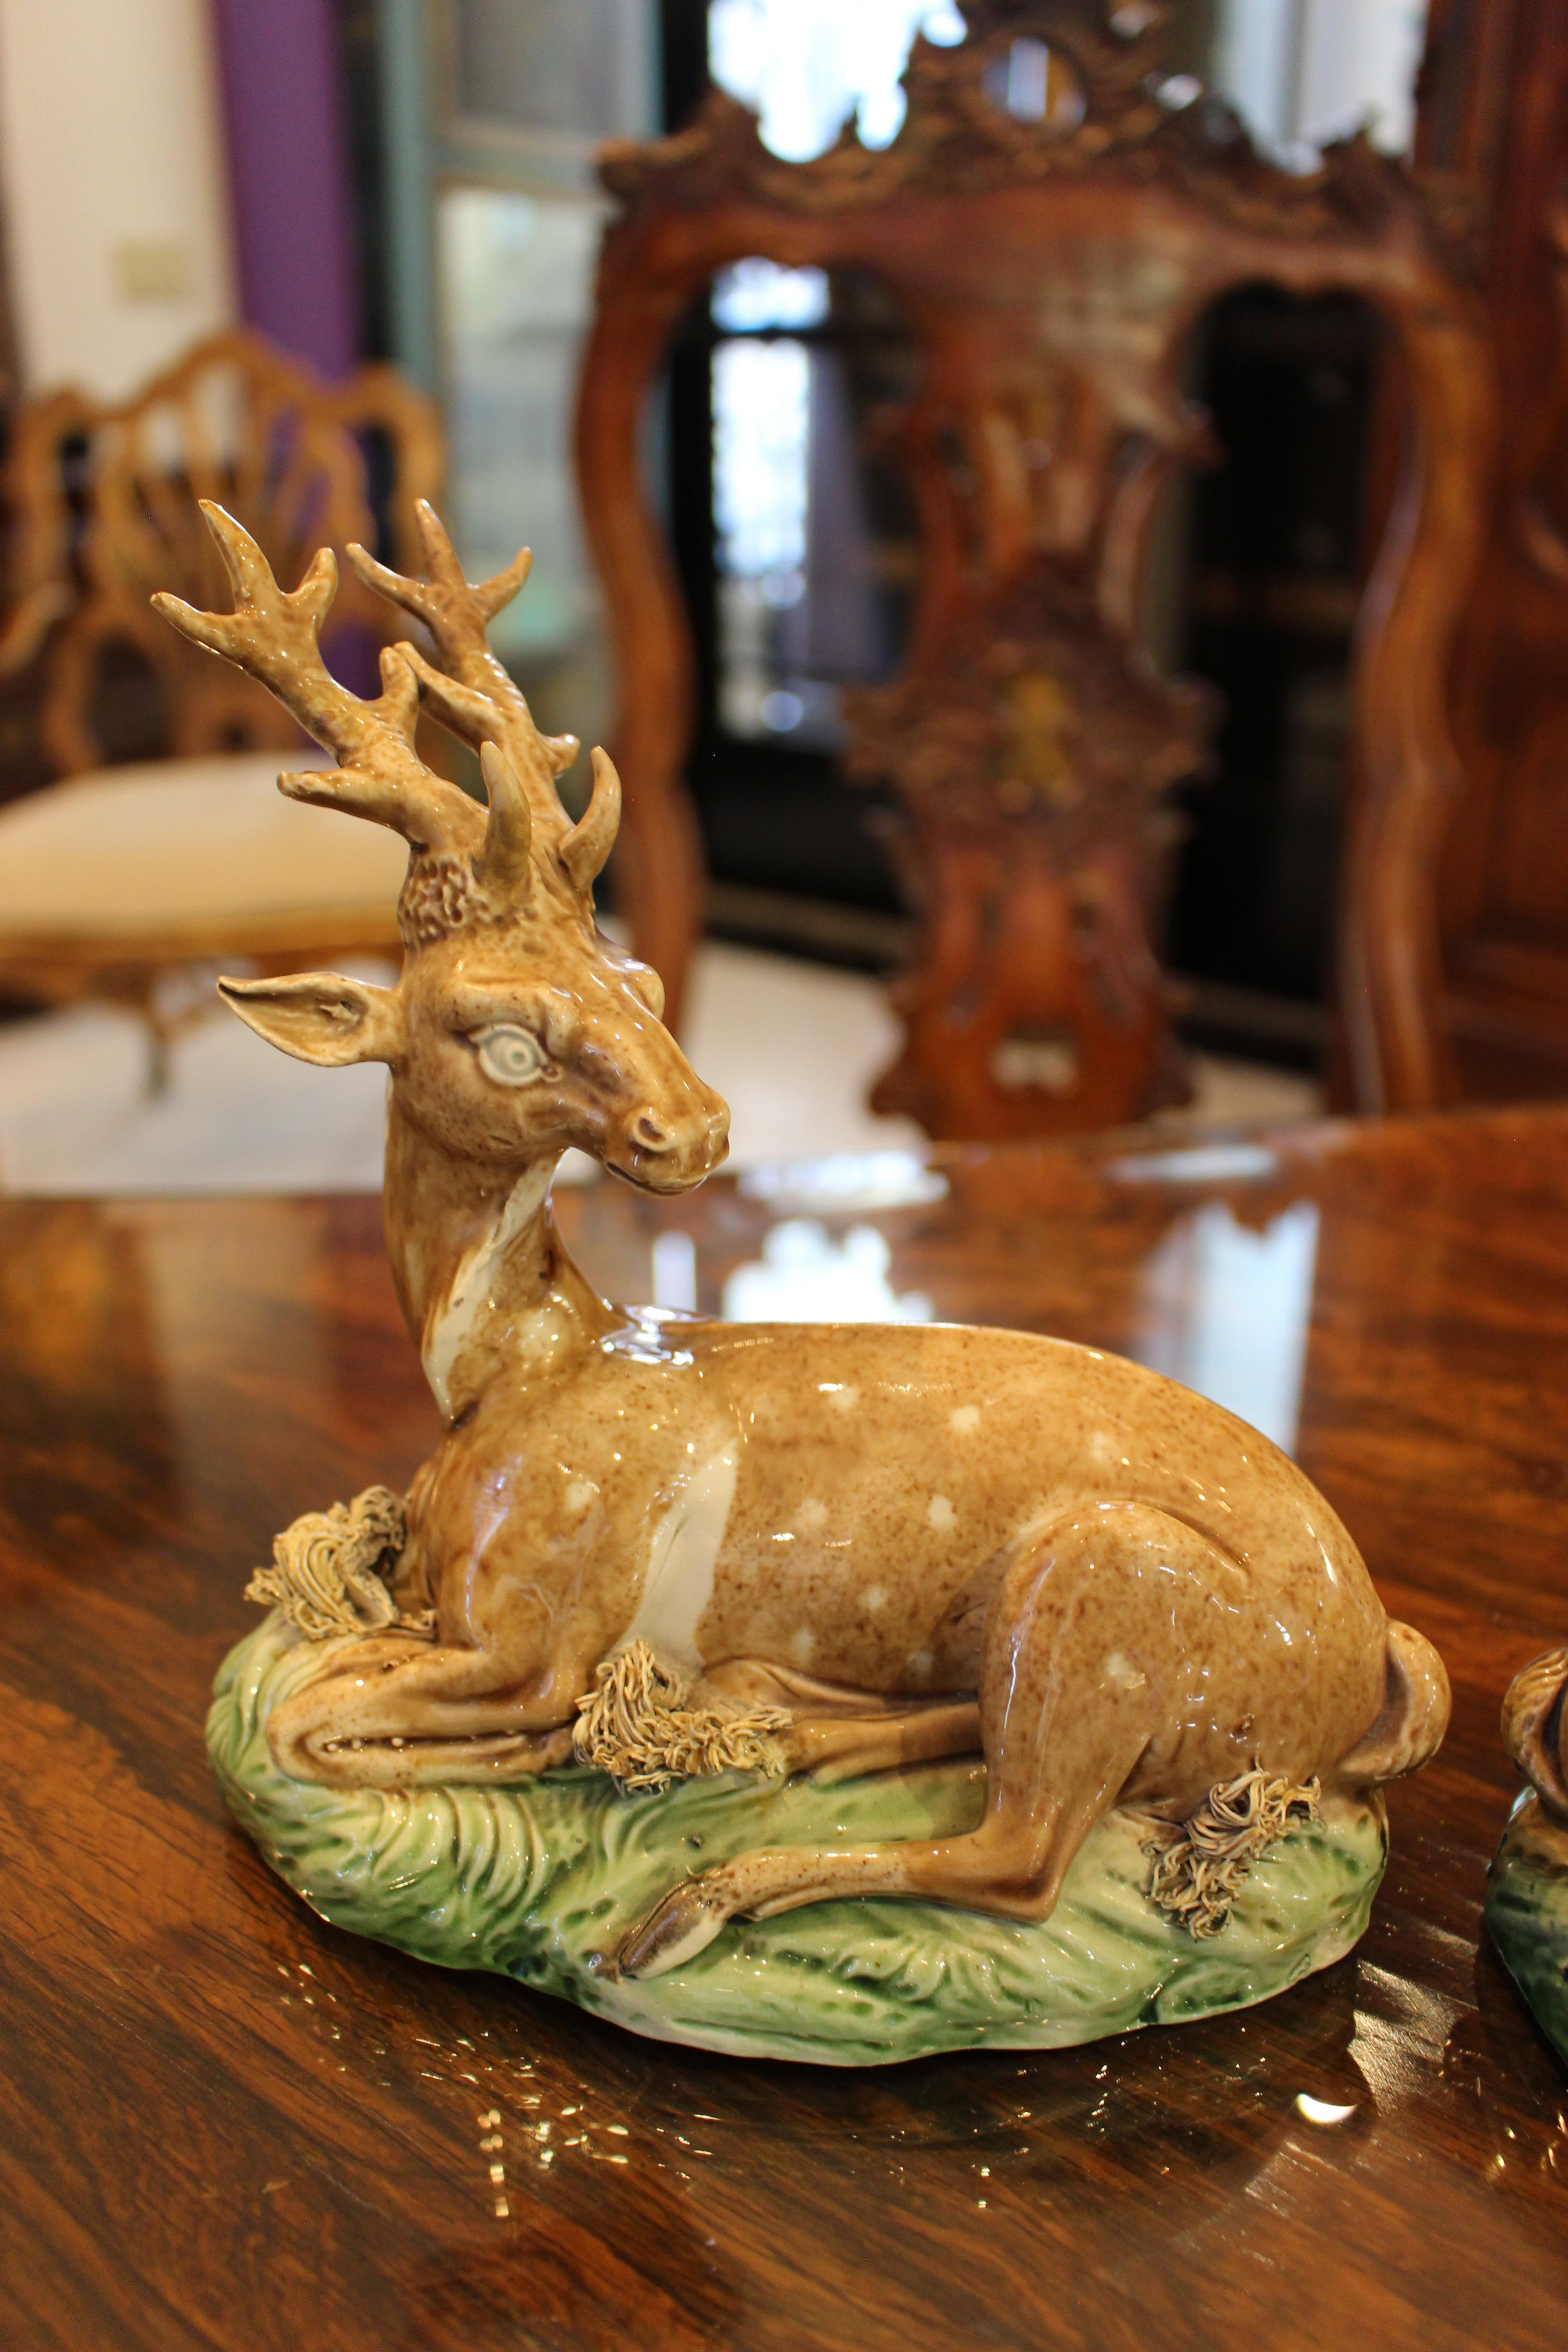 Pair of Staffordshire Pearlware models of a stag and hind, each spotted deer modeled recumbent on a grassy mound. From the collection of Peggy and David Rockefeller, Circa 1770.